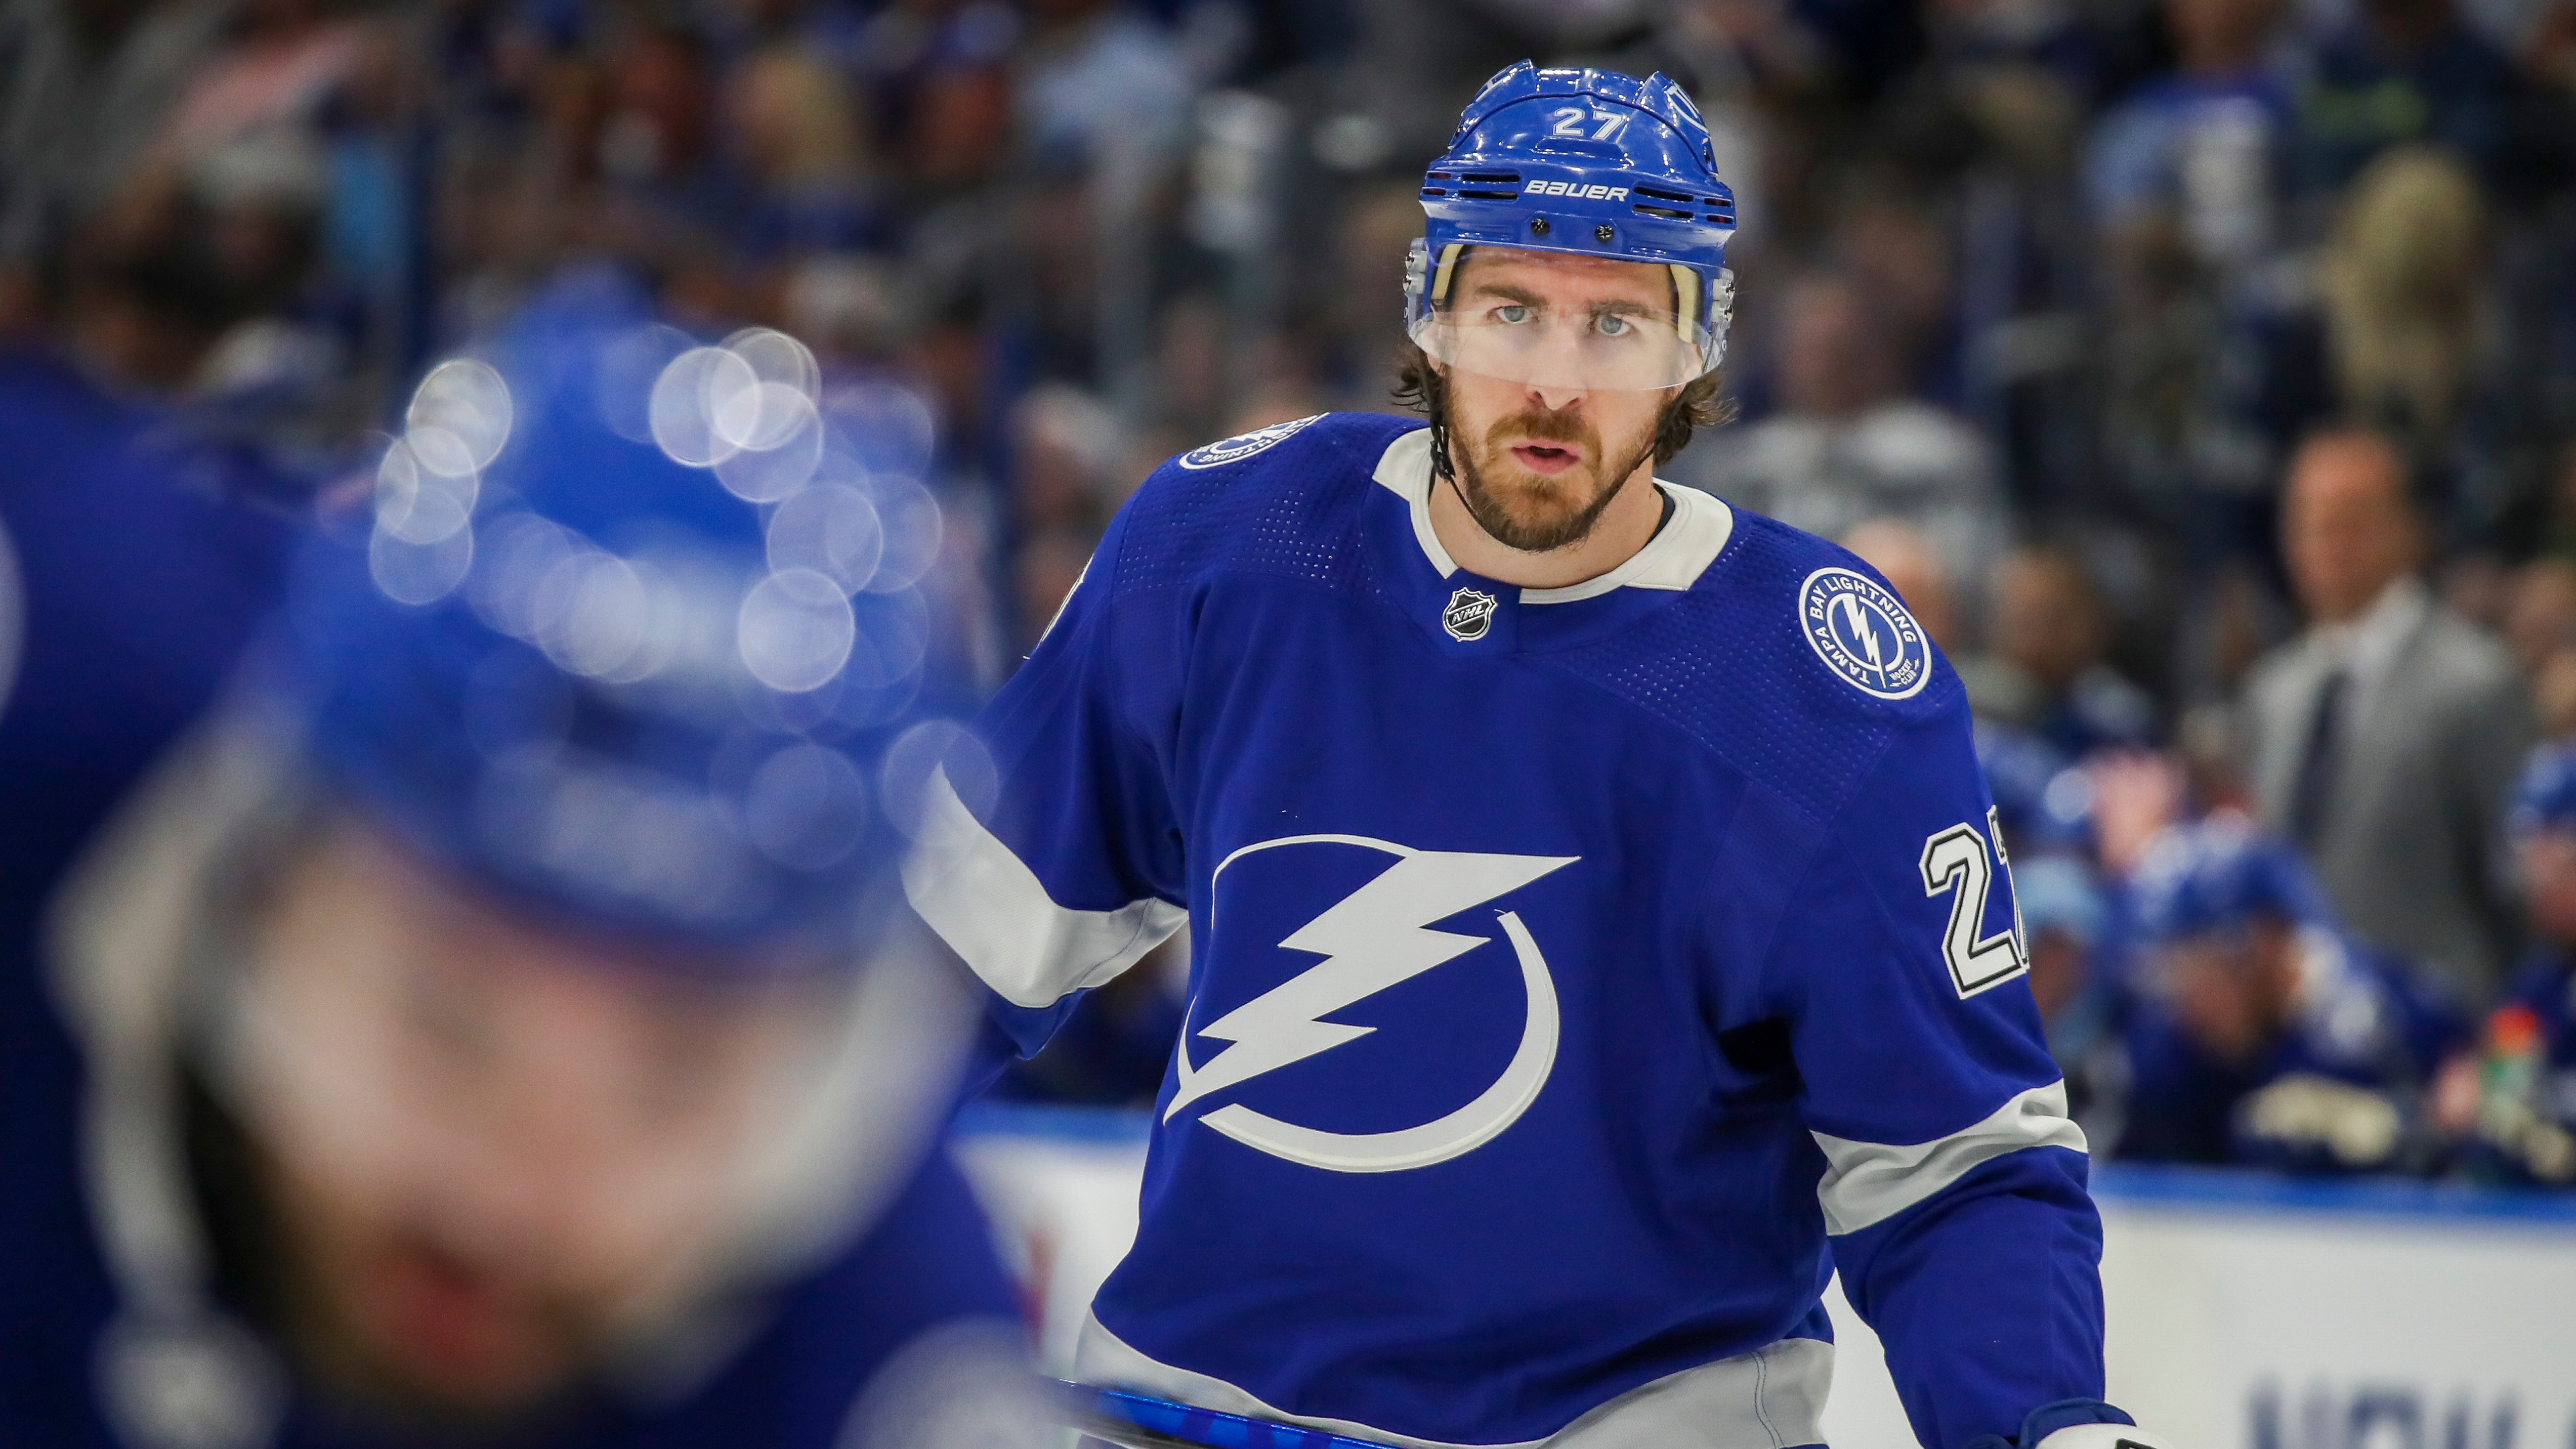 Lightning Journal: McDonagh honored by home state